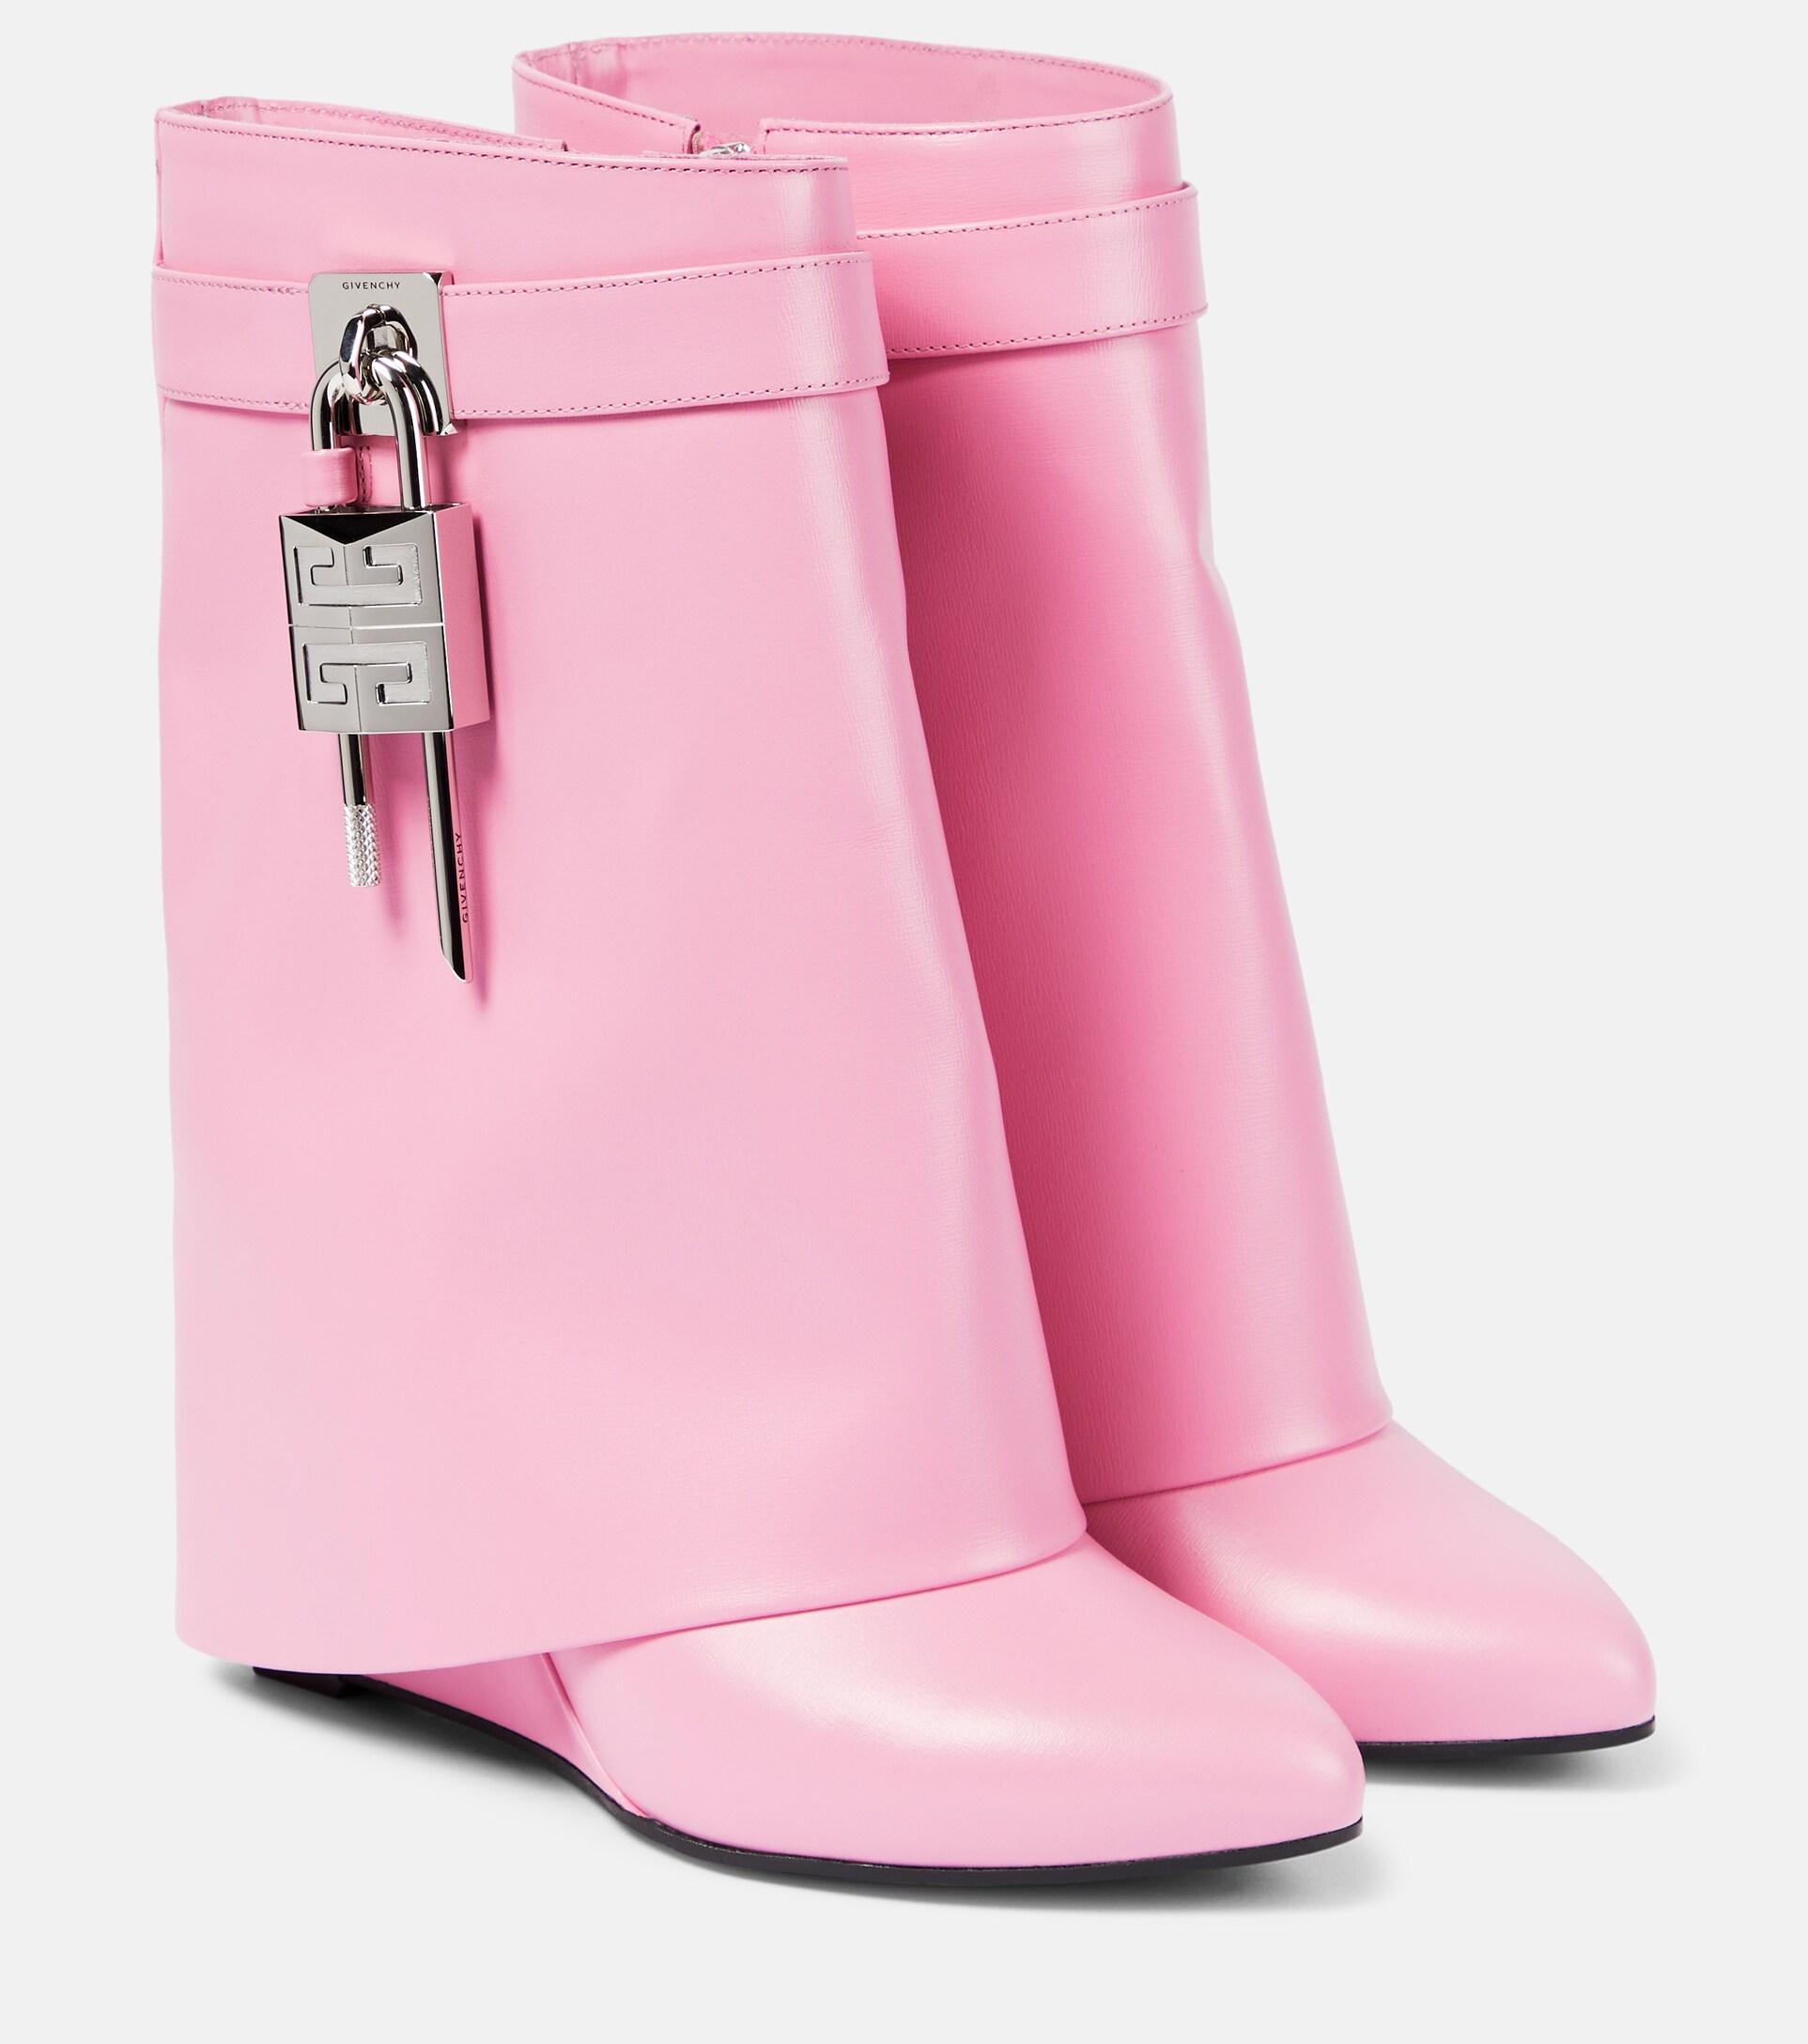 Givenchy Shark Lock Leather Ankle Boots in Pink | Lyst